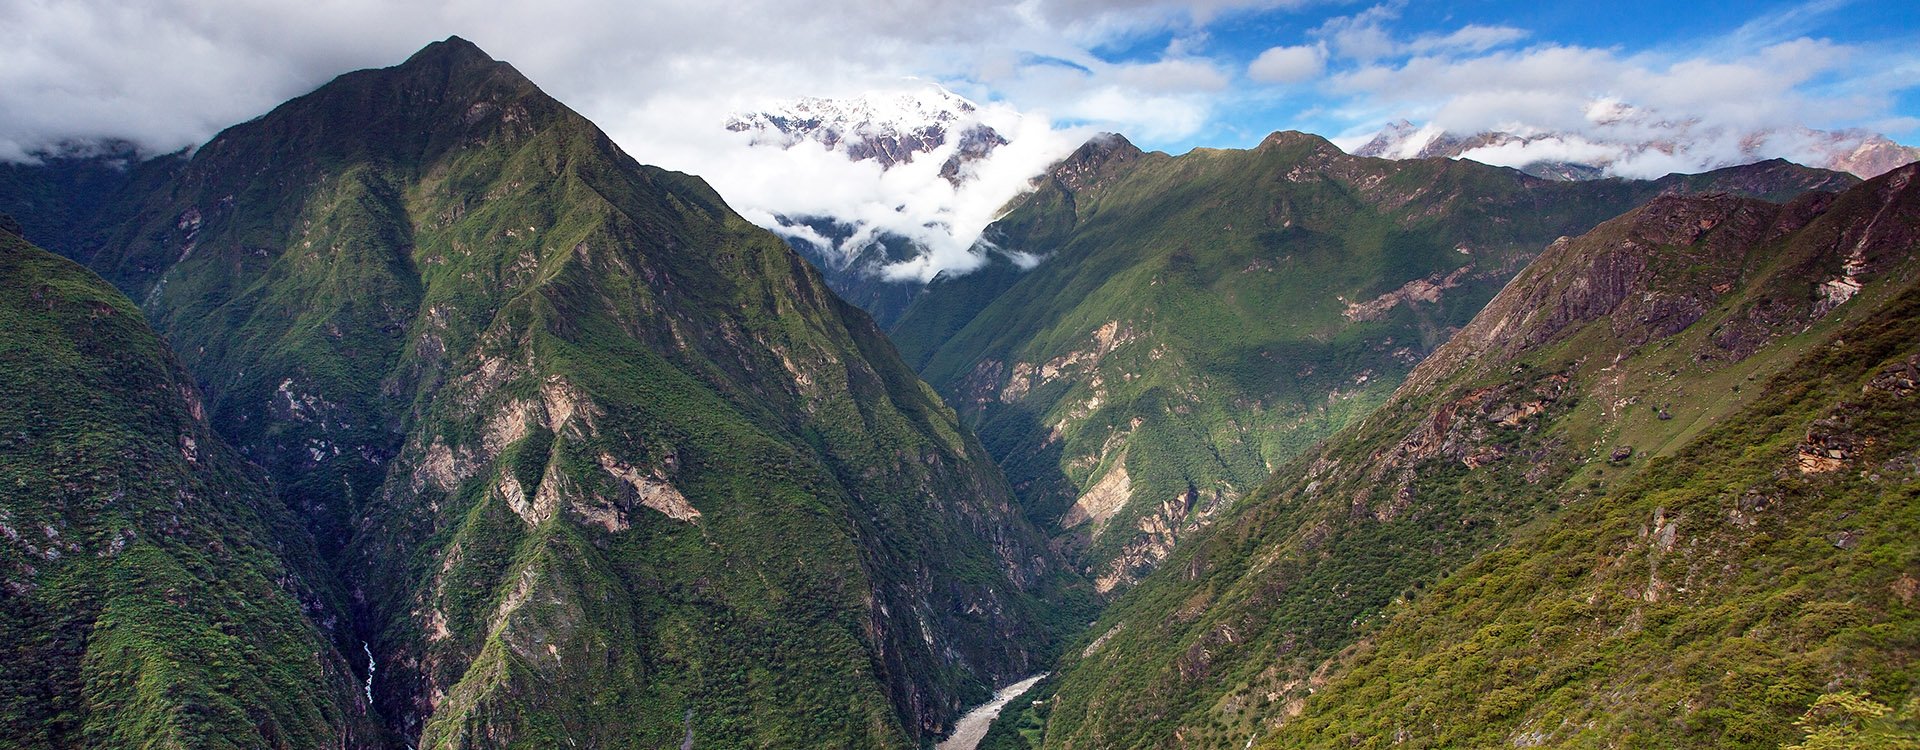 Rio Apurimac, Apurimac is upper part of the longist and the largest Amazon river, view from Choquequirao trekking trail, Cuzco area, Peruvian Andes